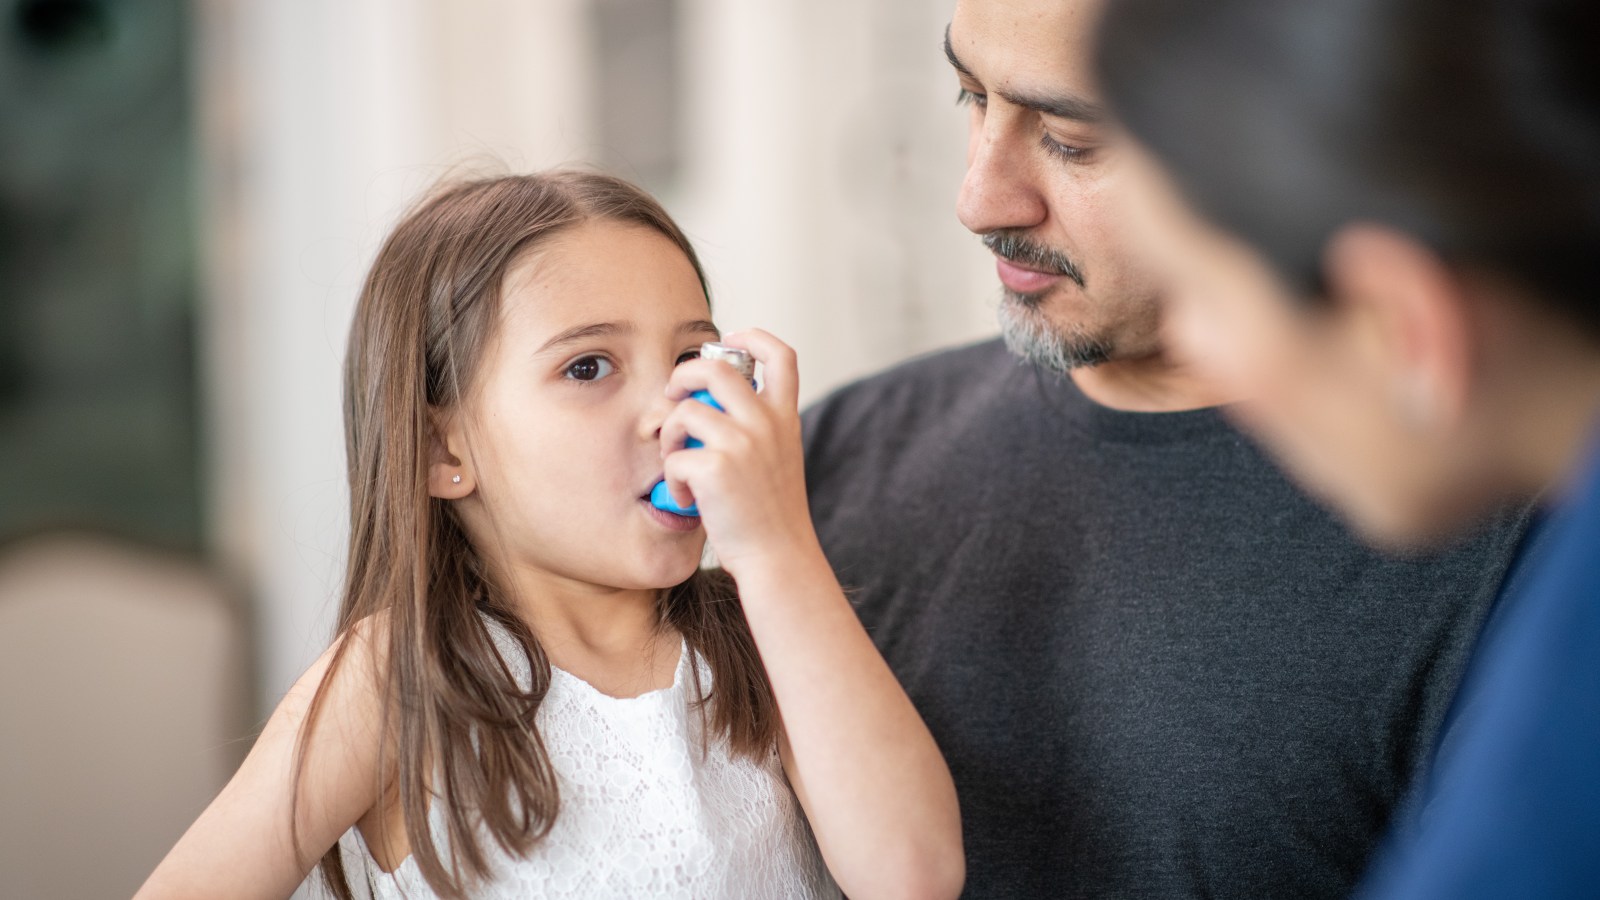 LIST: Richmond ranks 7th most challenging city for people with asthma